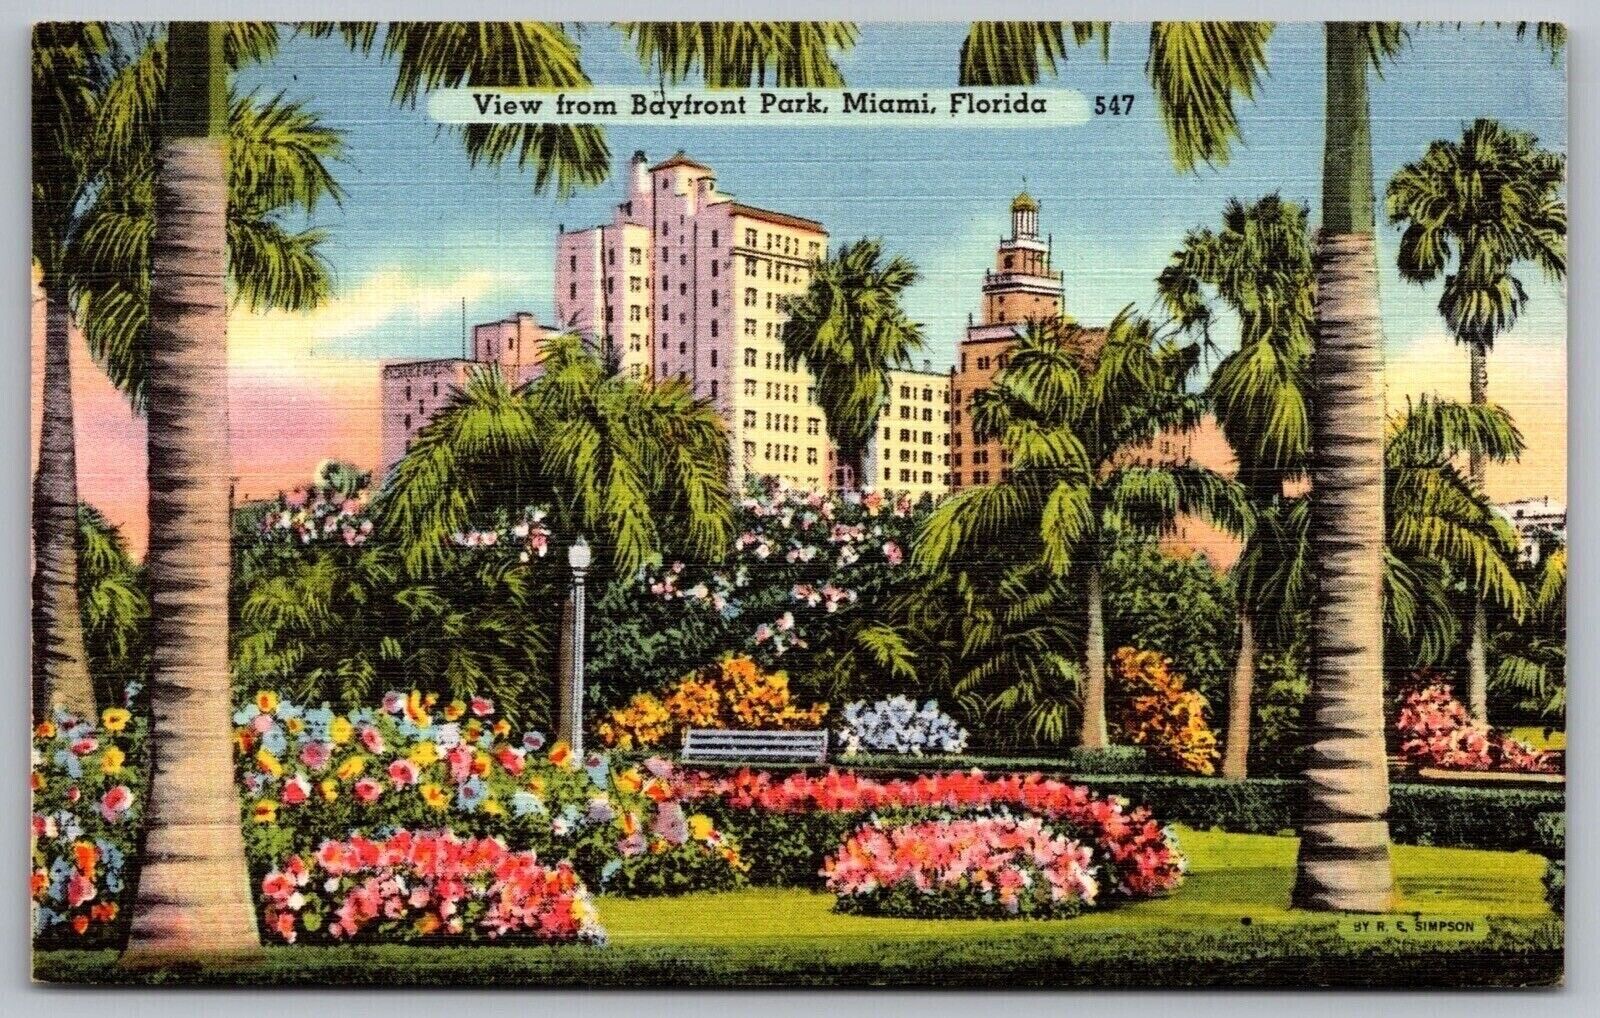 View From Bayfront Park Miami Florida FL Linen Postcard PM Cancel WOB Note